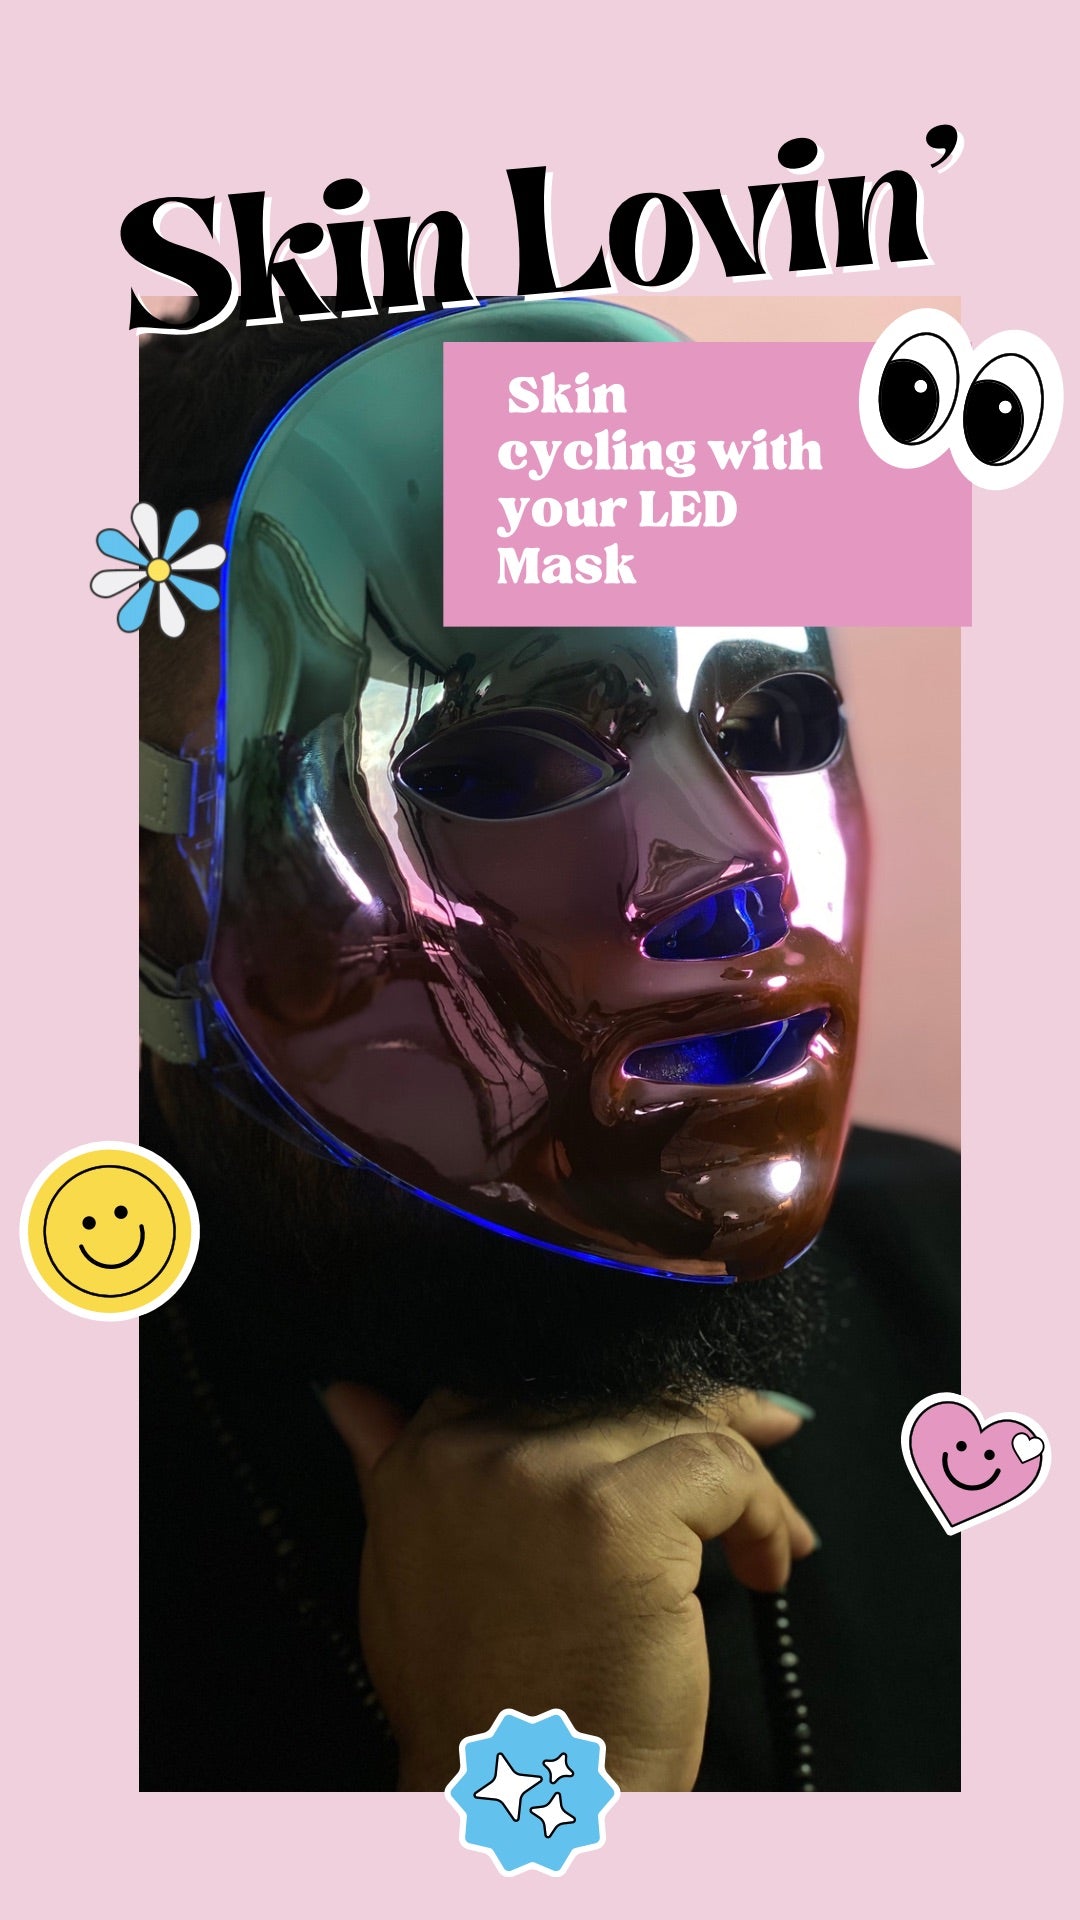 Skin cycling with your LED Mask